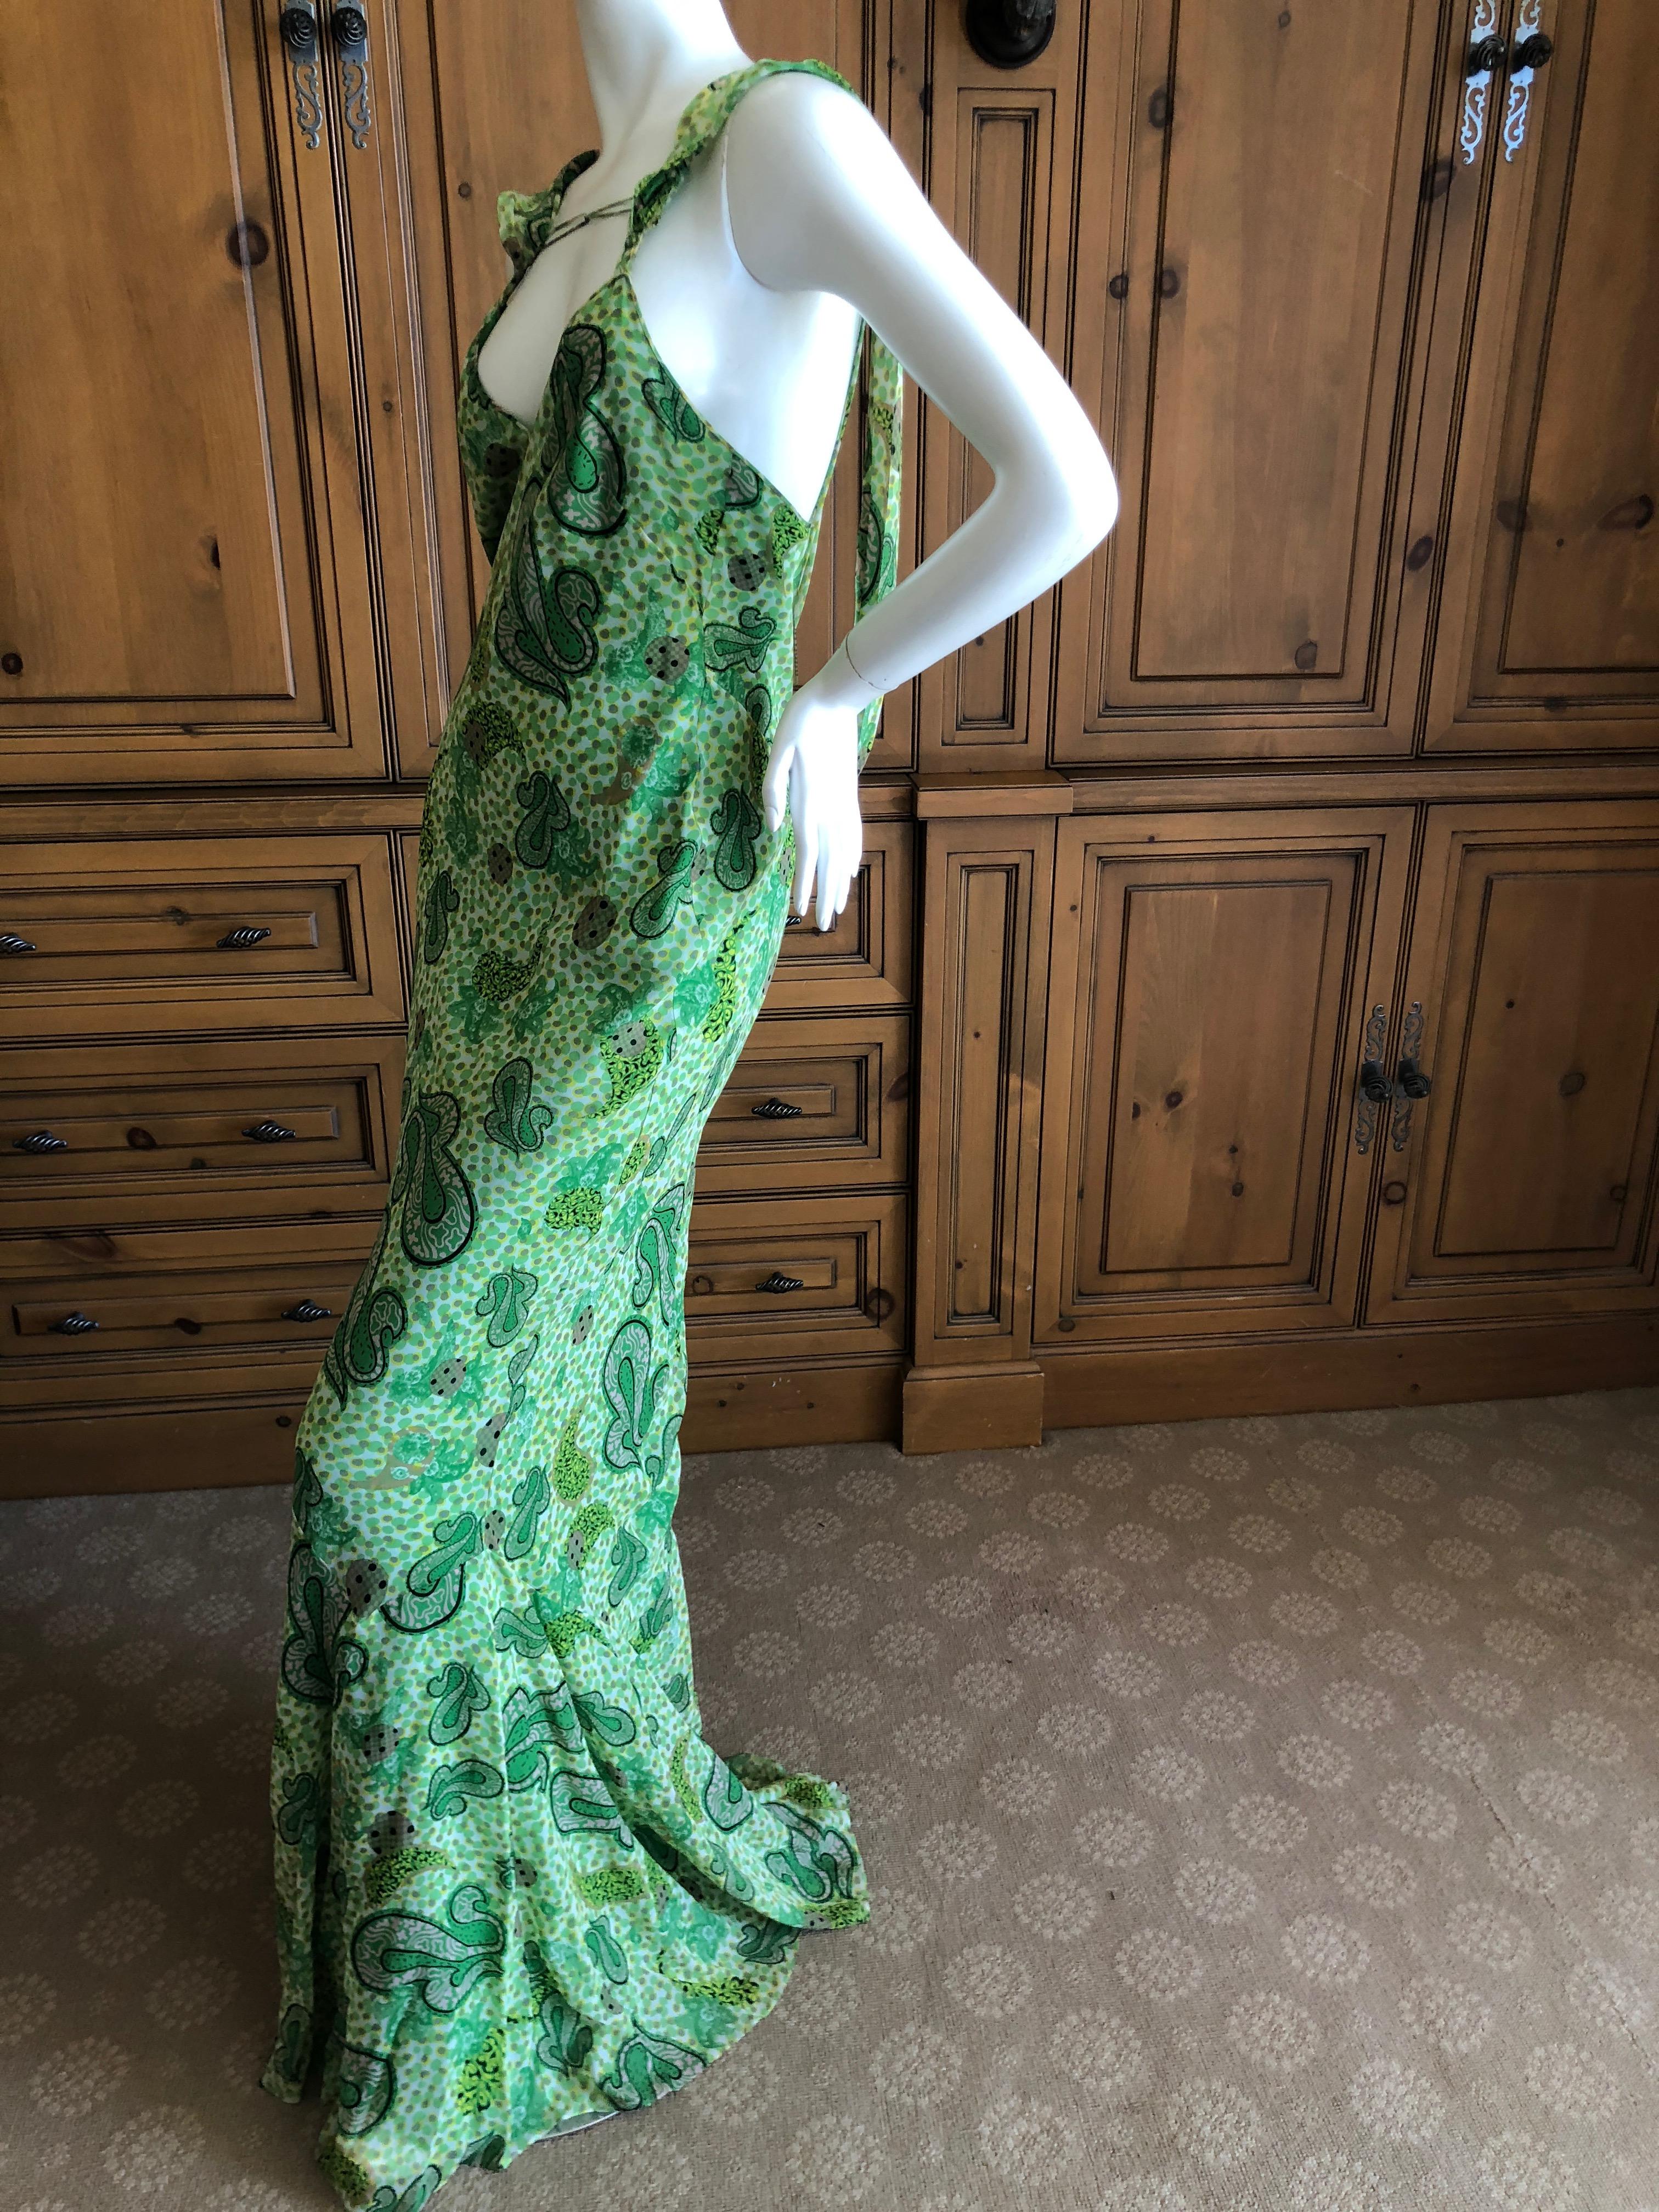  John Galliano 2002 Green Silk Paisley Ruffled Evening Dress with Low Cowl Back For Sale 1